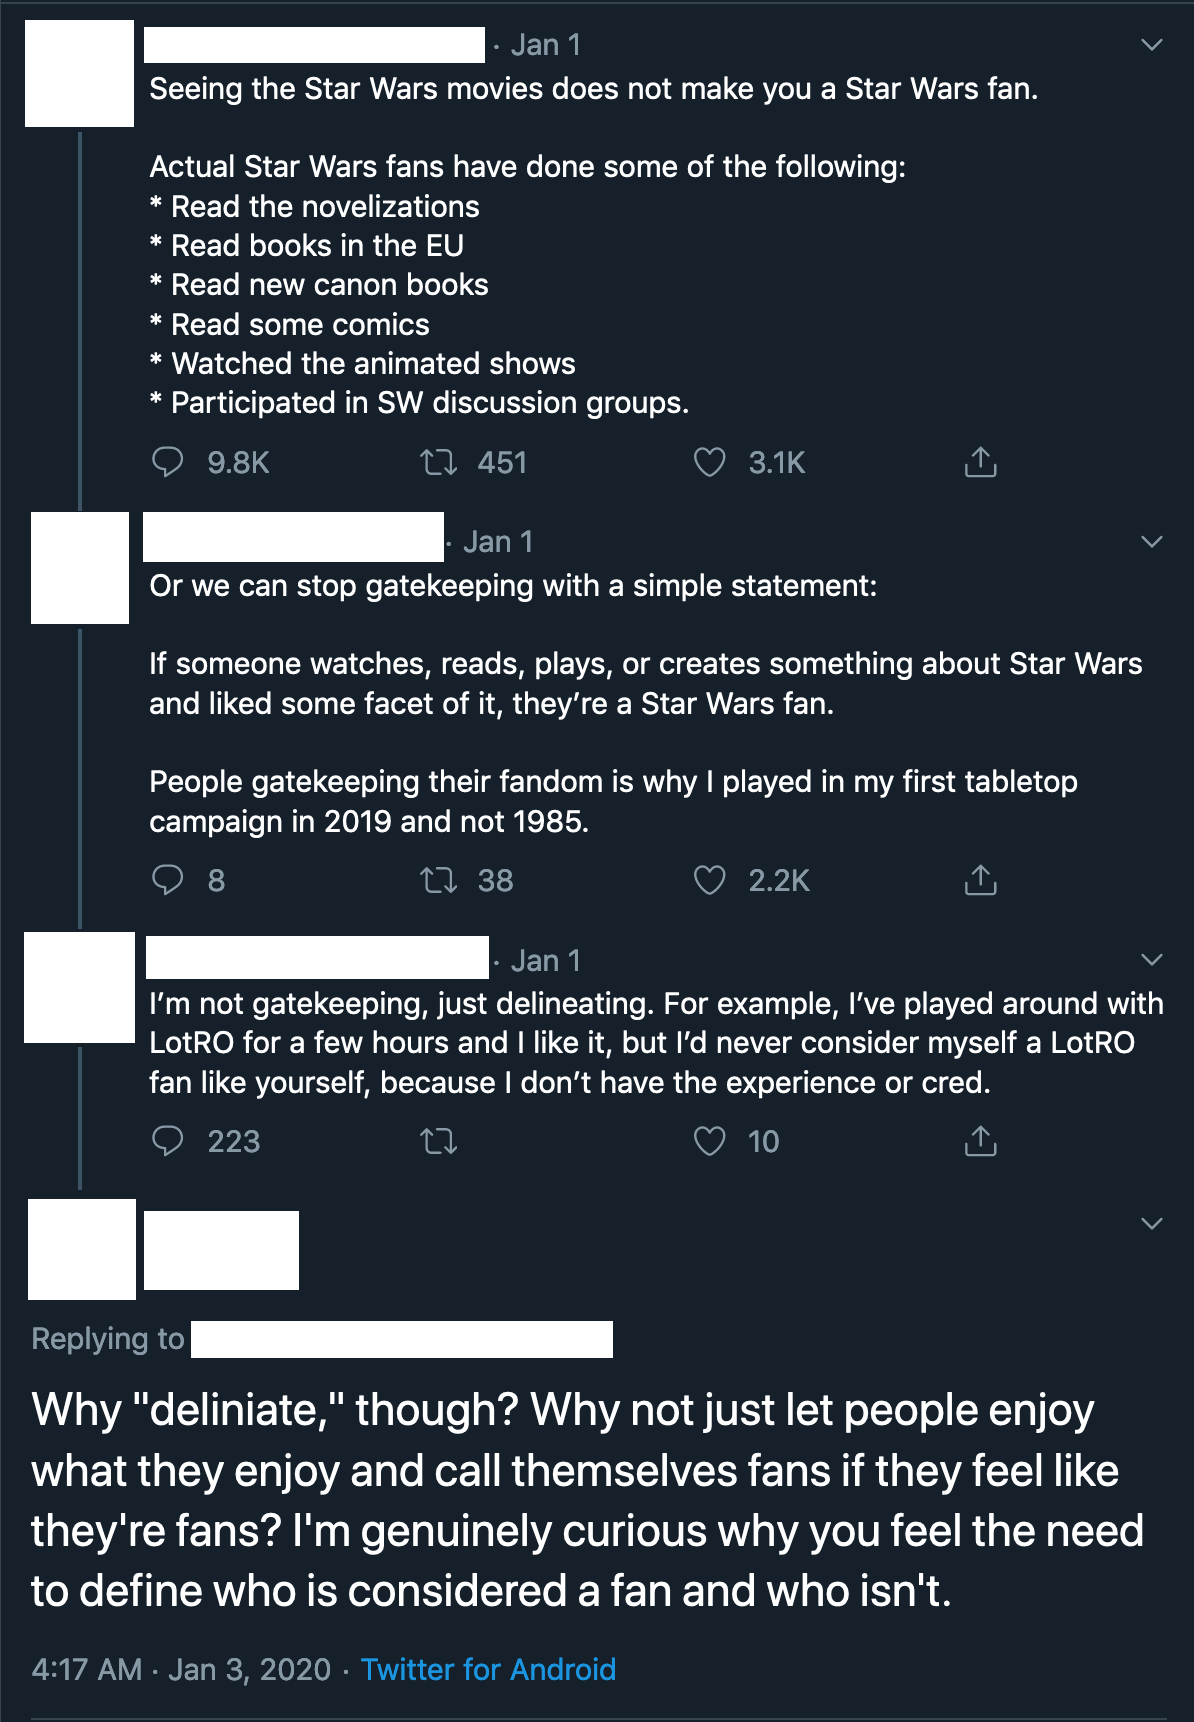 Image from Twitter: Subject 1: 'Seeing the Star Wars movies does not make you a Star Wars fan. Actual Star Wars fans have done some of the following: *Read the novelizations  *Read books in the EU *Read new canon books *Watched the animated shows *Participated in SW discussion groups.' Subject 2: 'Or we can stop gatekeeping with a simple statement: If someone watches, reads, plays, or creates something about Star Wars and liked some facet of it, they’re a Star Wars fan. People gatekeeping their fandom is why I played in my first tabletop campaign in 2019 and not 1985.' Subject 1: 'I’m not gatekeeping, just delineating. For example, I’ve played around with LotRO for a few hours and I like it, but I’d never consider myself a LotRO fan like yourself, because I don’t have the experience or cred.' Subject 2: 'Why ‘deliniate,’ though? Why not just let people enjoy what they enjoy and call themselves fans if they feel like they’re fans? I’m genuinely curious why you feel the need to define who is considered a fan and who isn’t.'